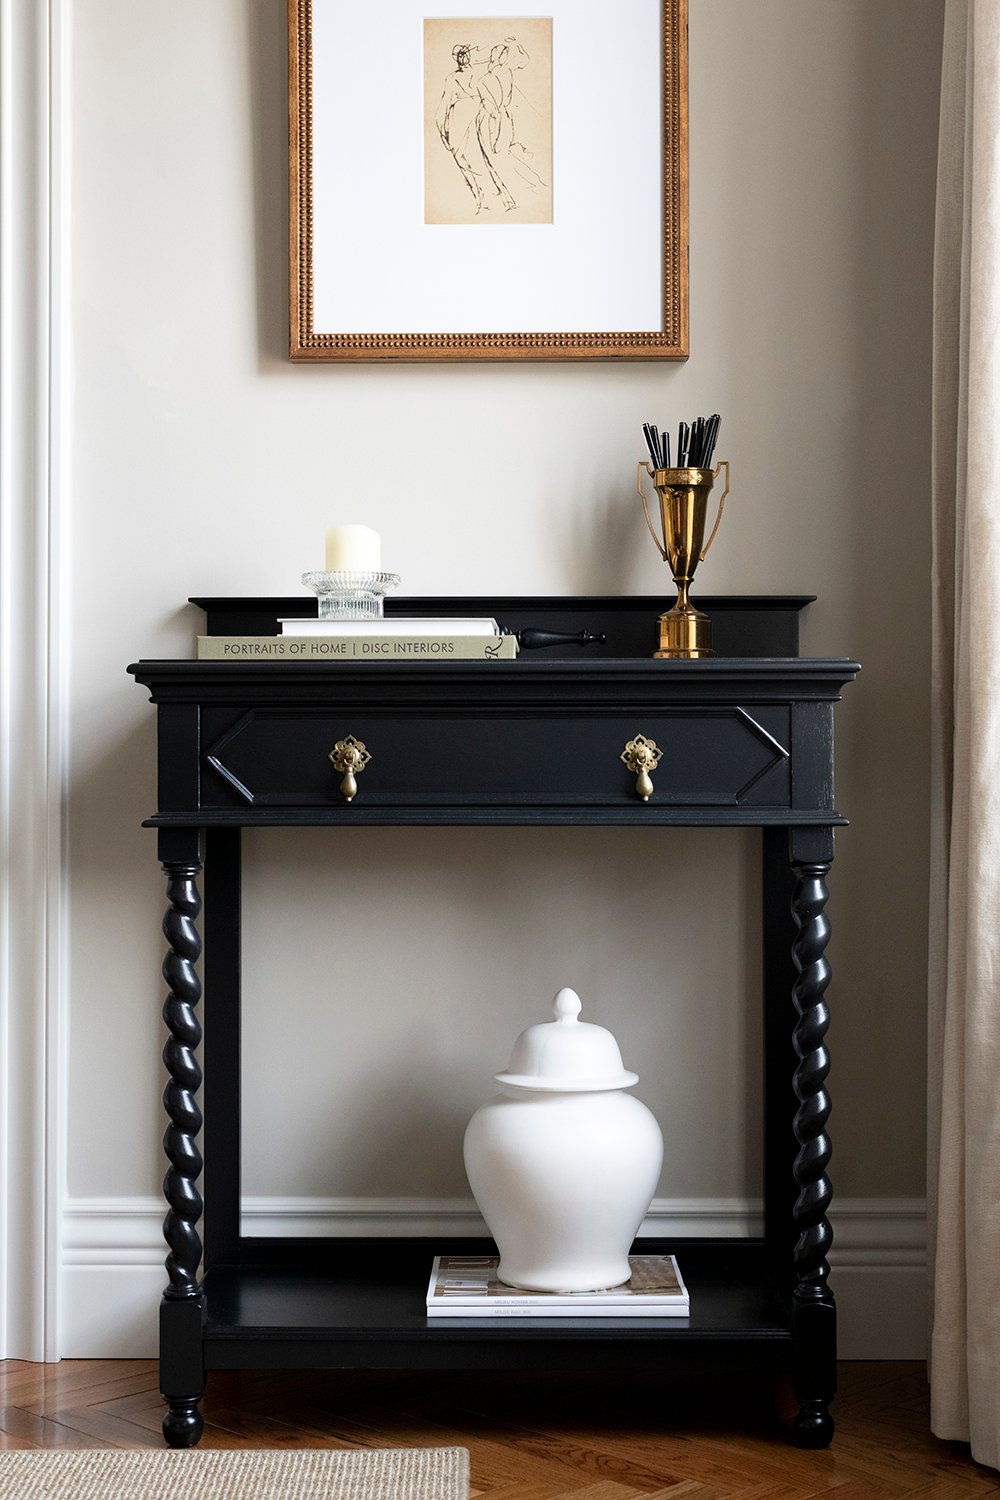 Roundup : Black Console Tables with Storage - roomfortuesday.com